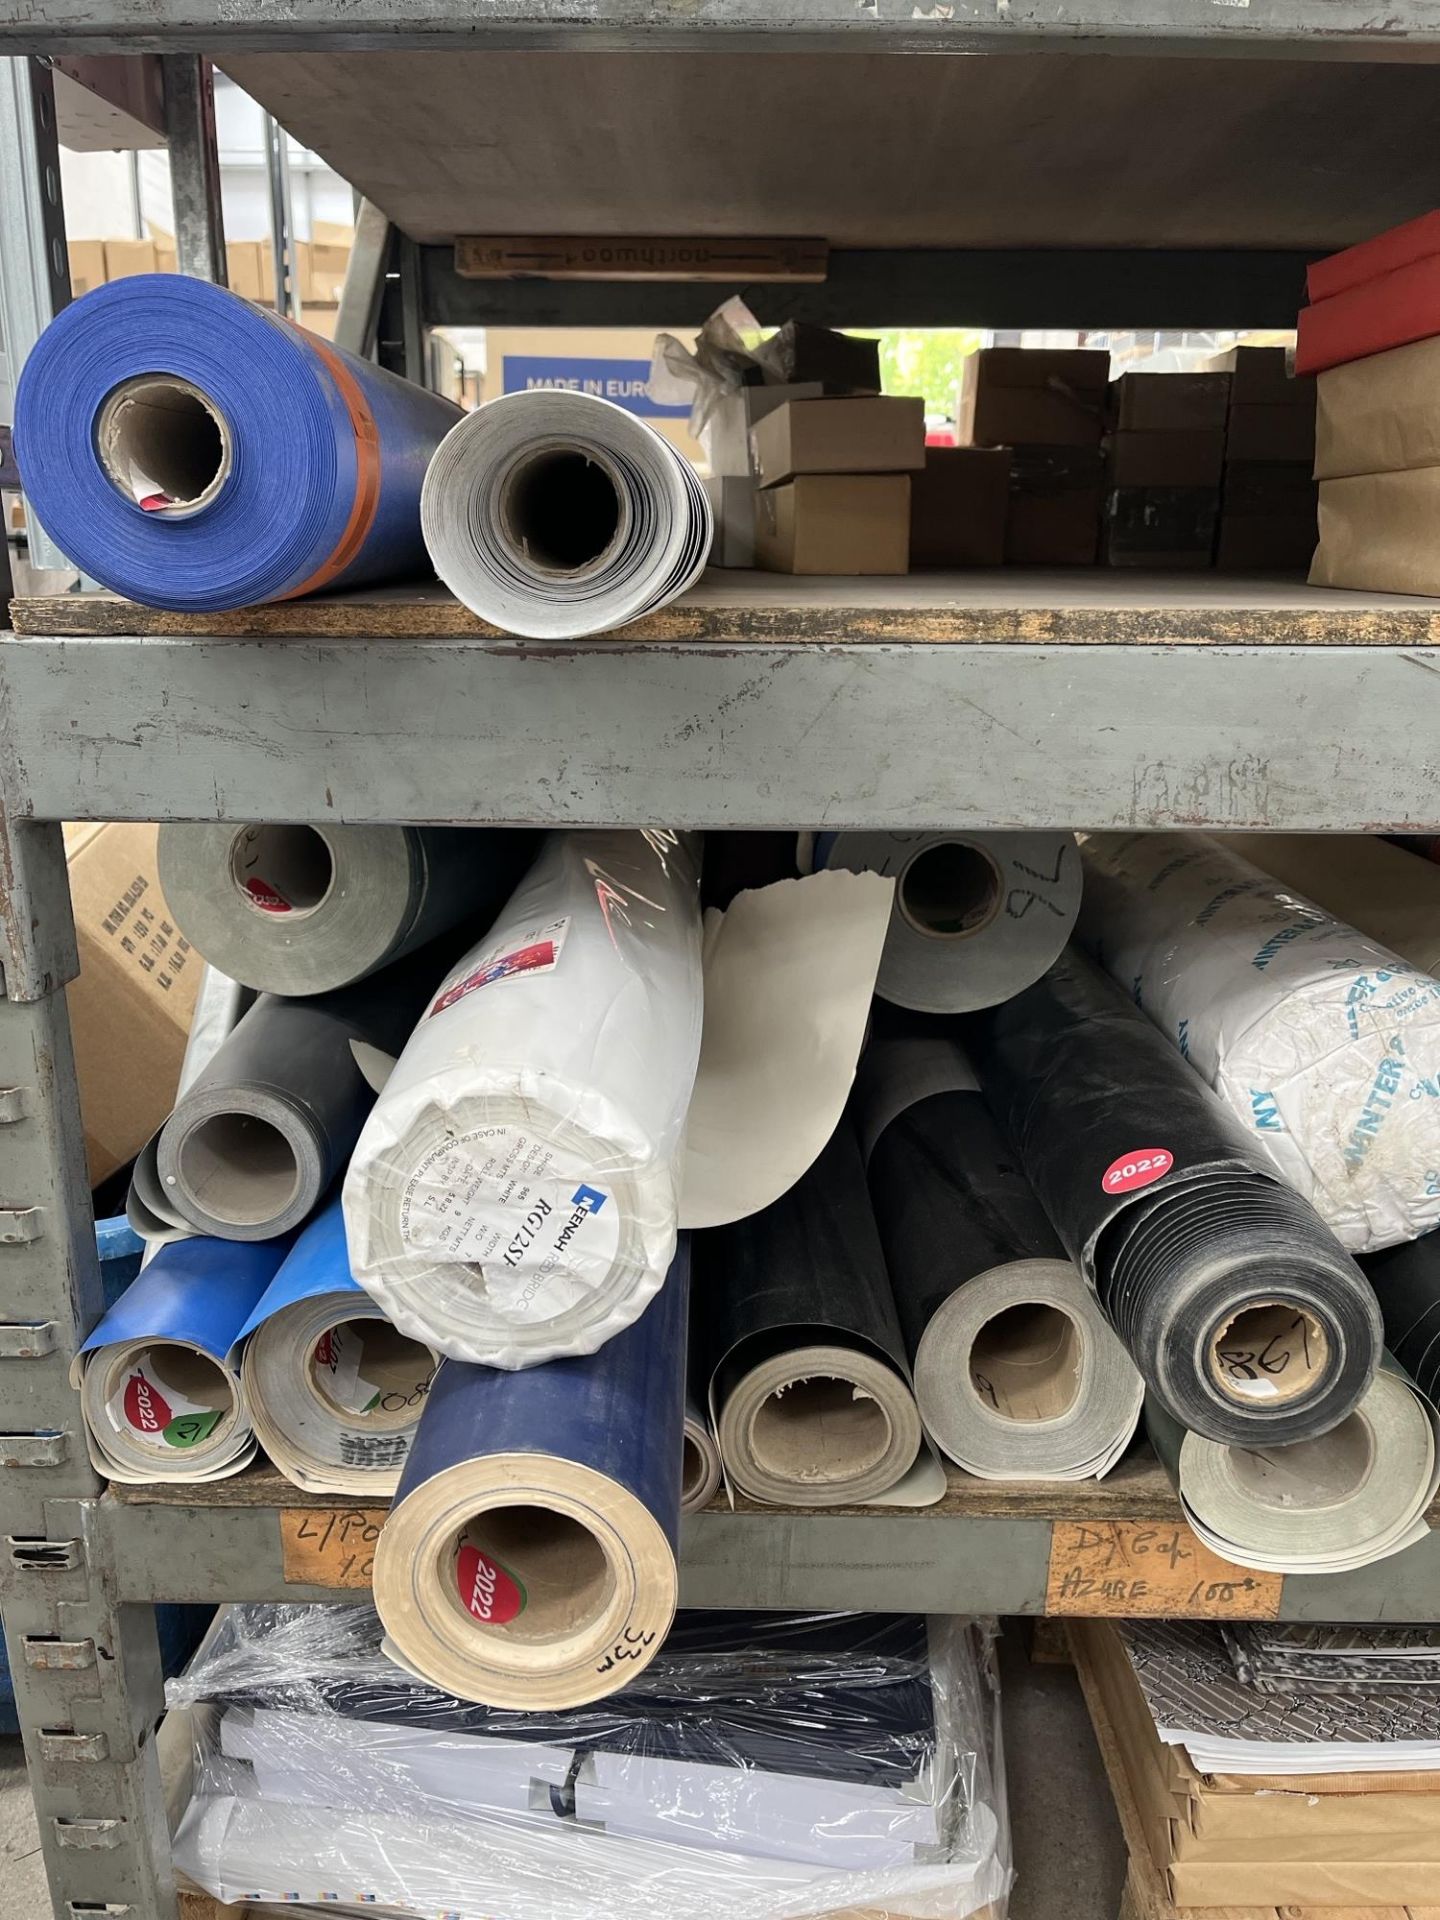 Quantity of Unused & Part Used Rolls of Paper/Vinyl/Canvas & Binding Accessories - As Pictured - Image 16 of 22